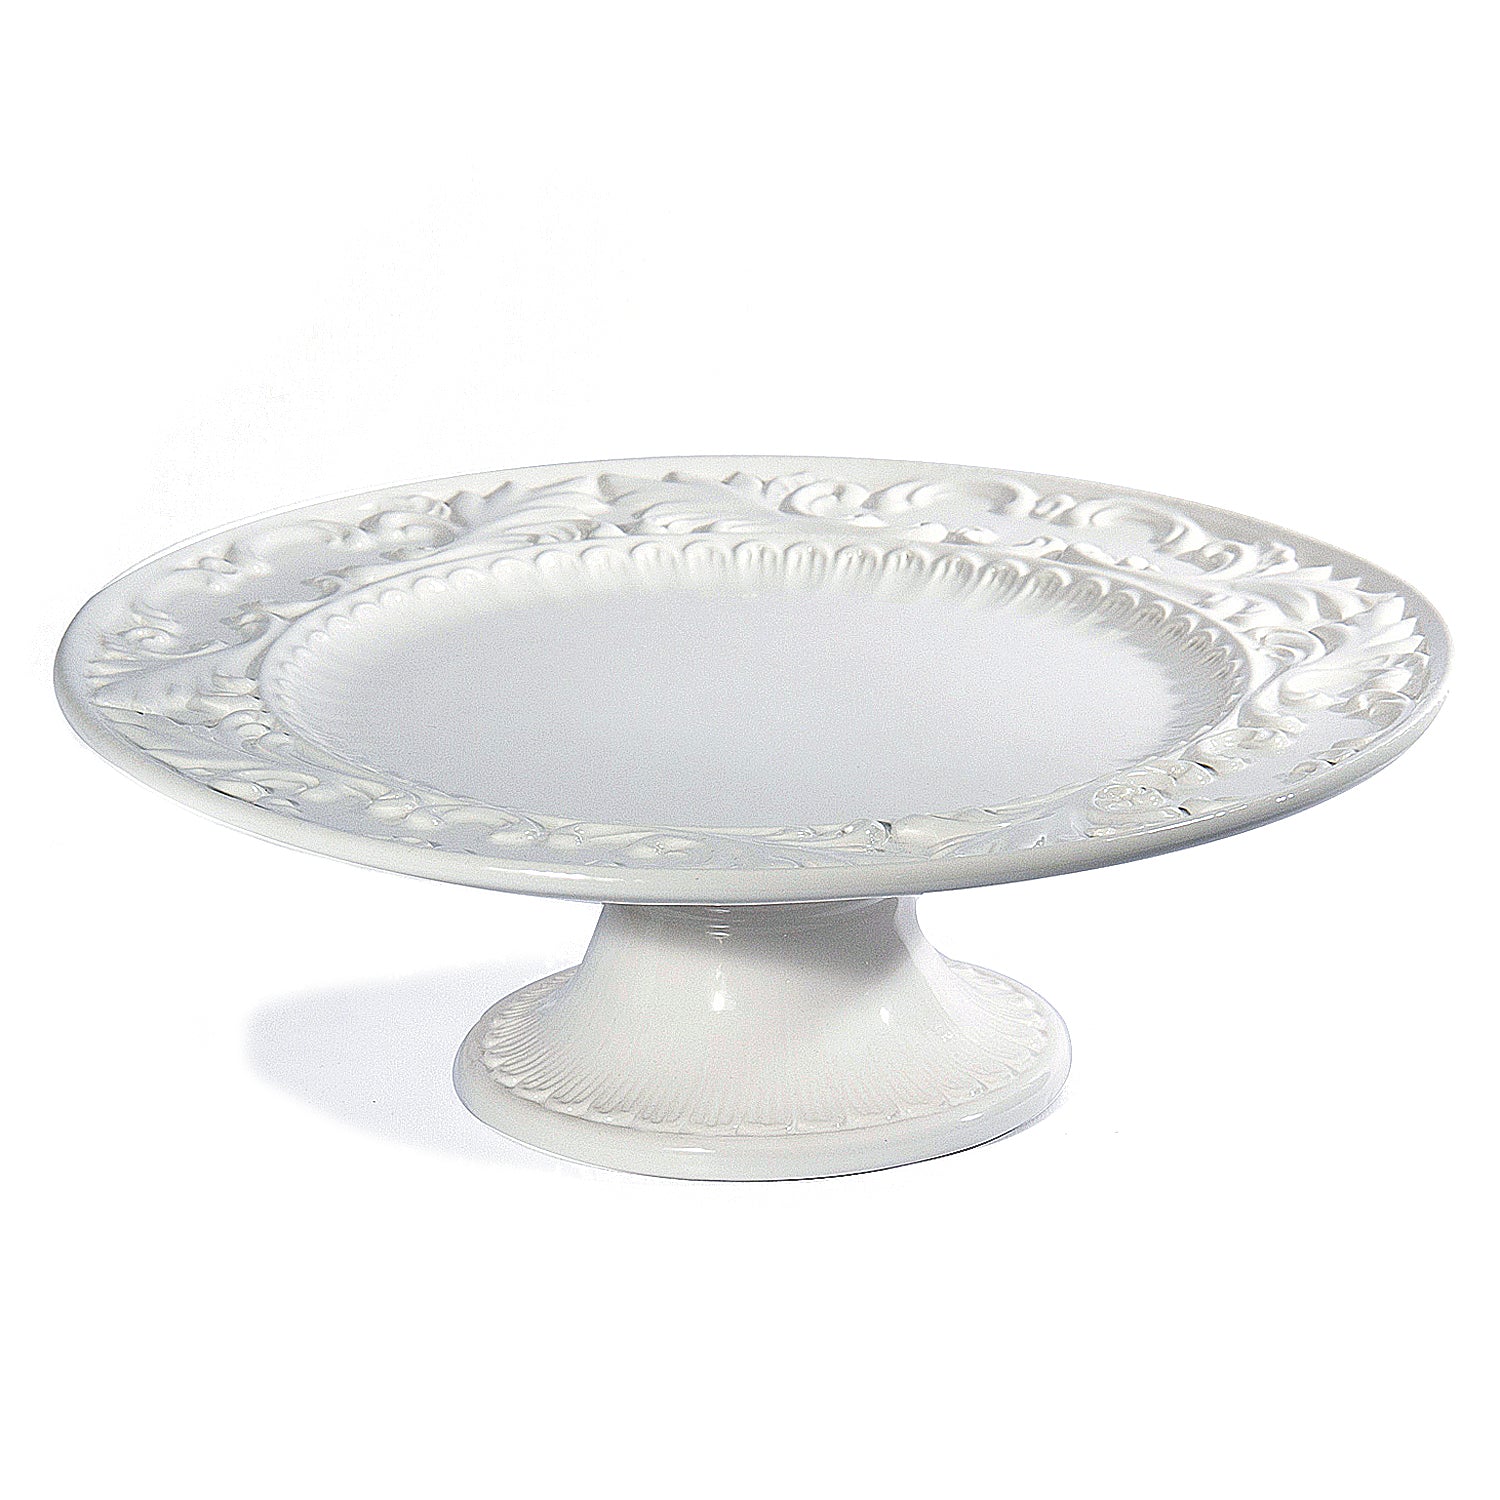 Baroque White Footed Platter, RSVP Style - RSVP Style